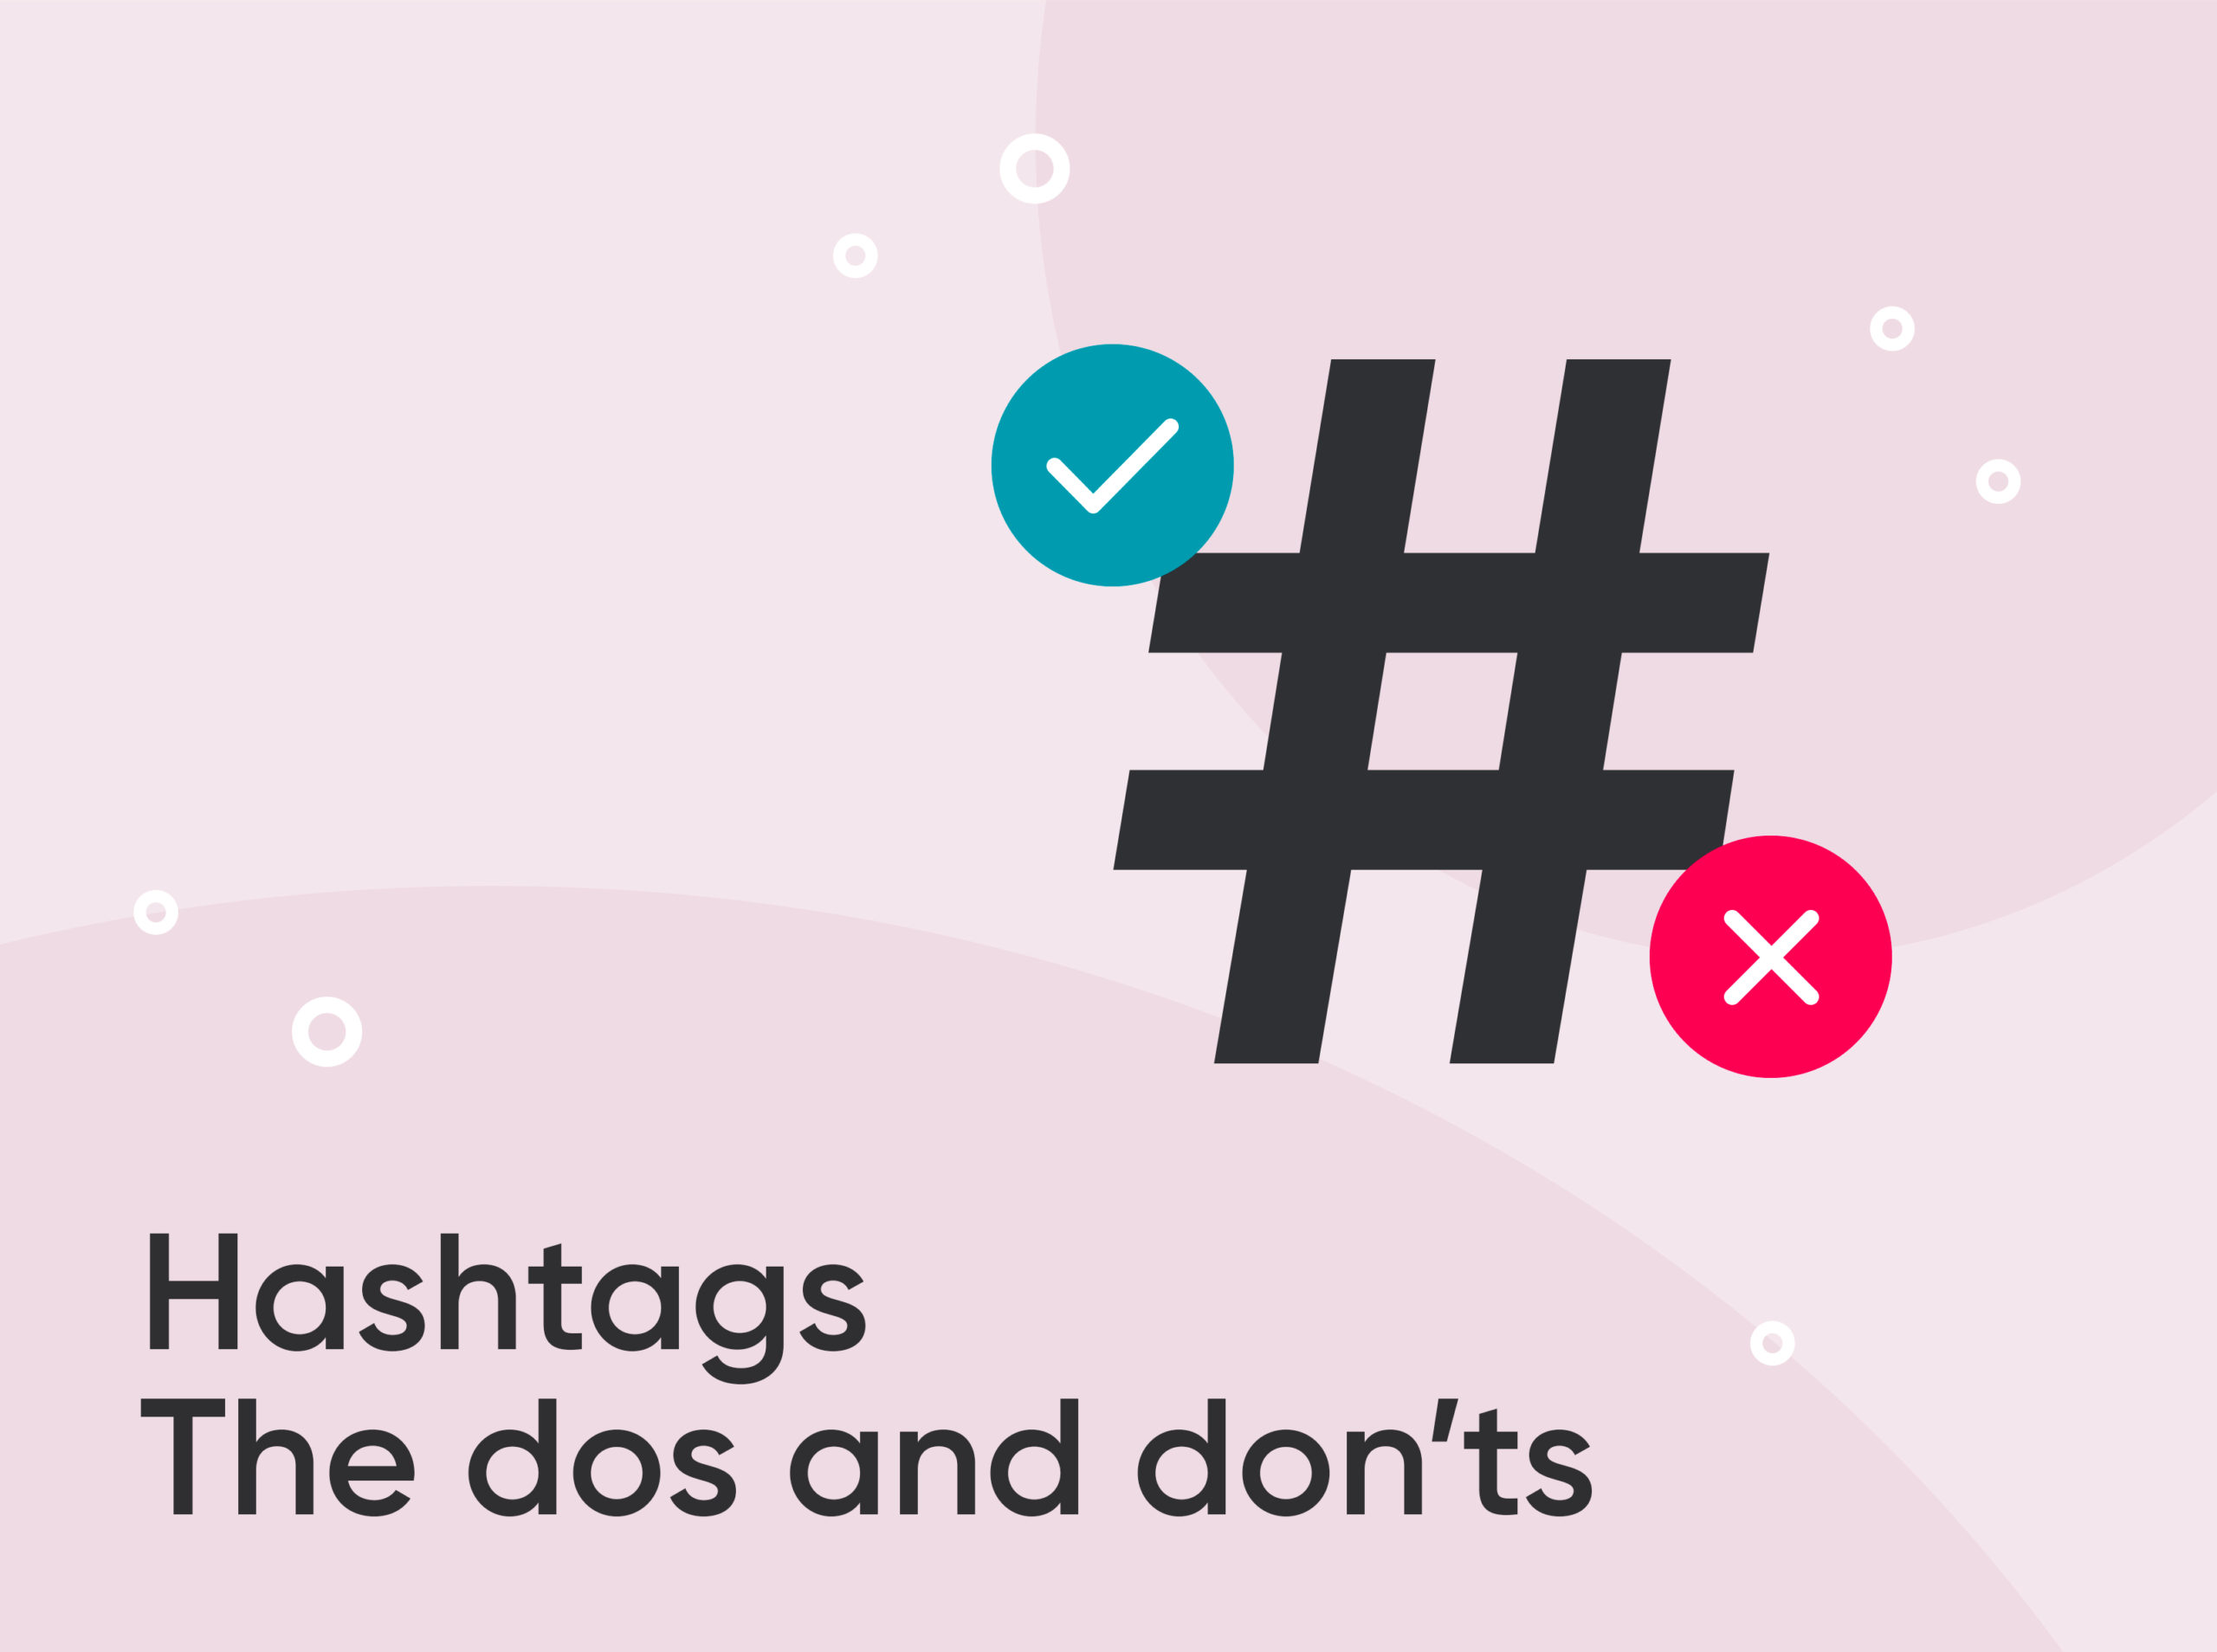 How to use #hashtags in your social media posts